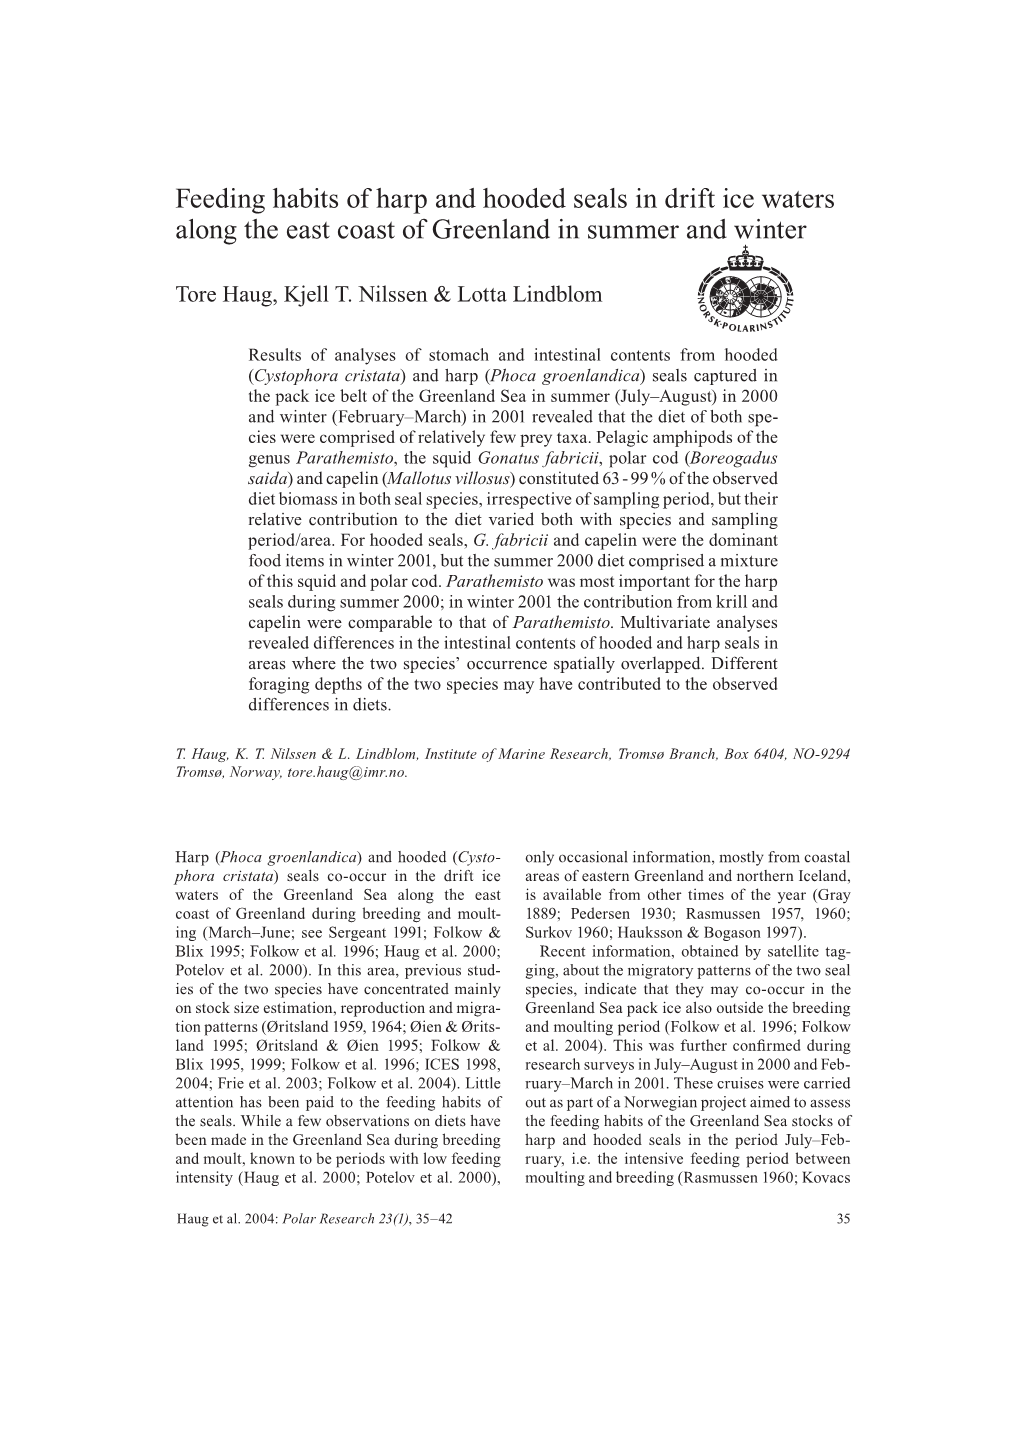 Feeding Habits of Harp and Hooded Seals in Drift Ice Waters Along the East Coast of Greenland in Summer and Winter